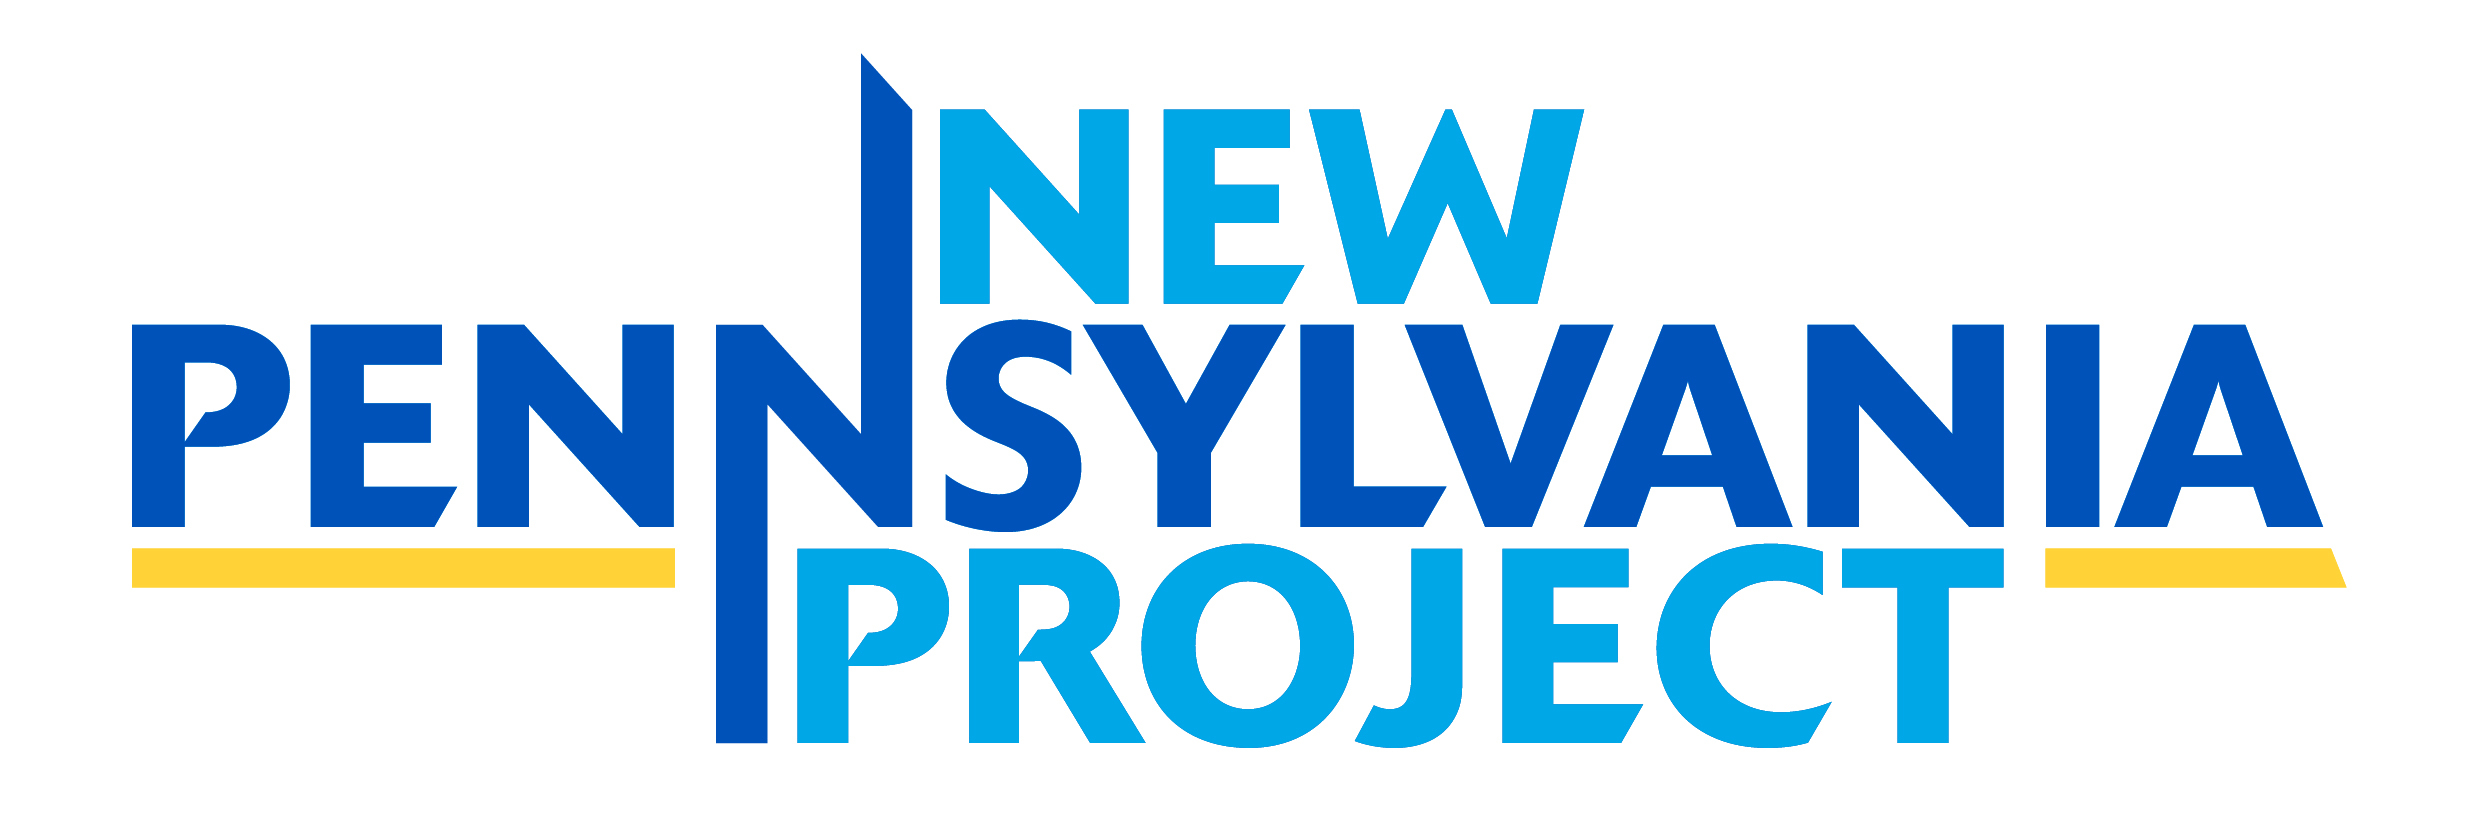 The New Pennsylvania Project